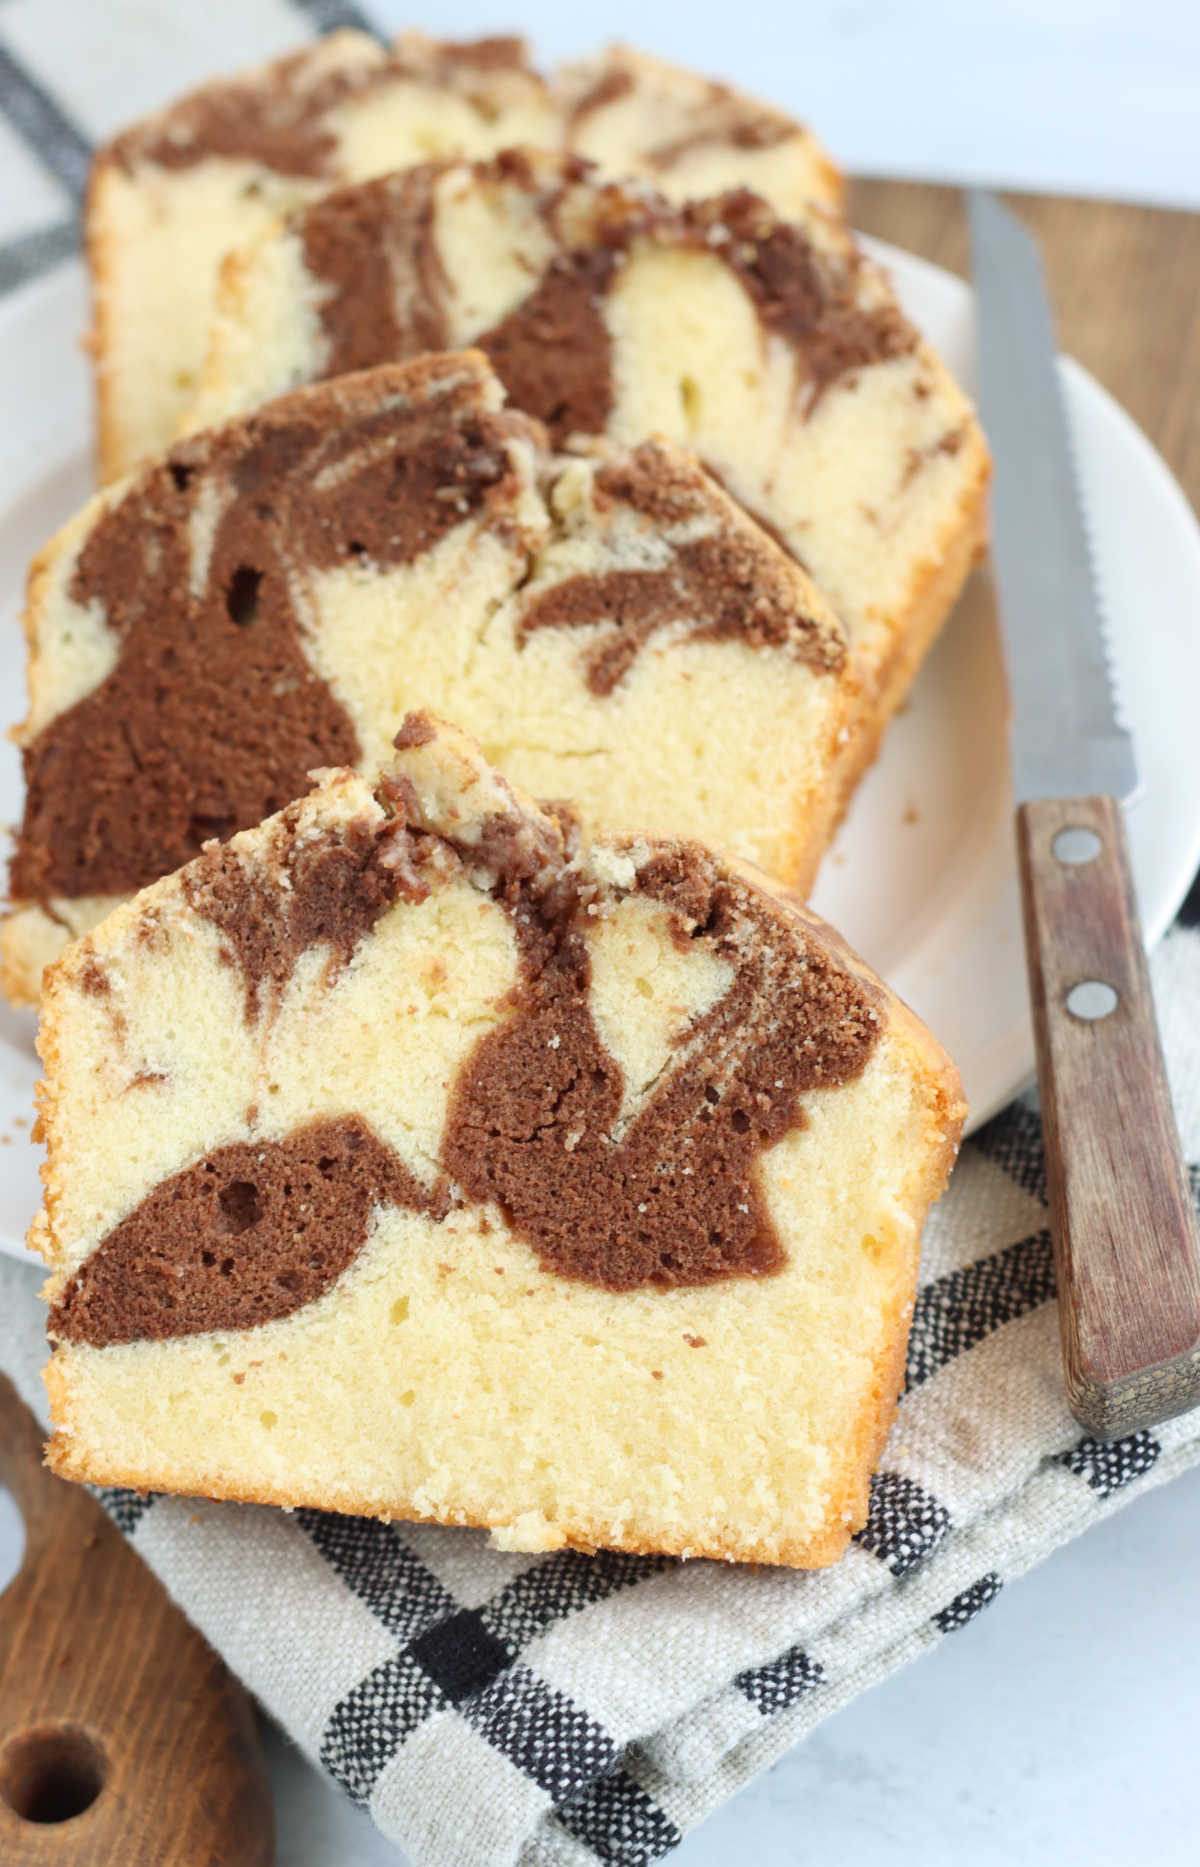 Slices of marble pound cake on small white plate.